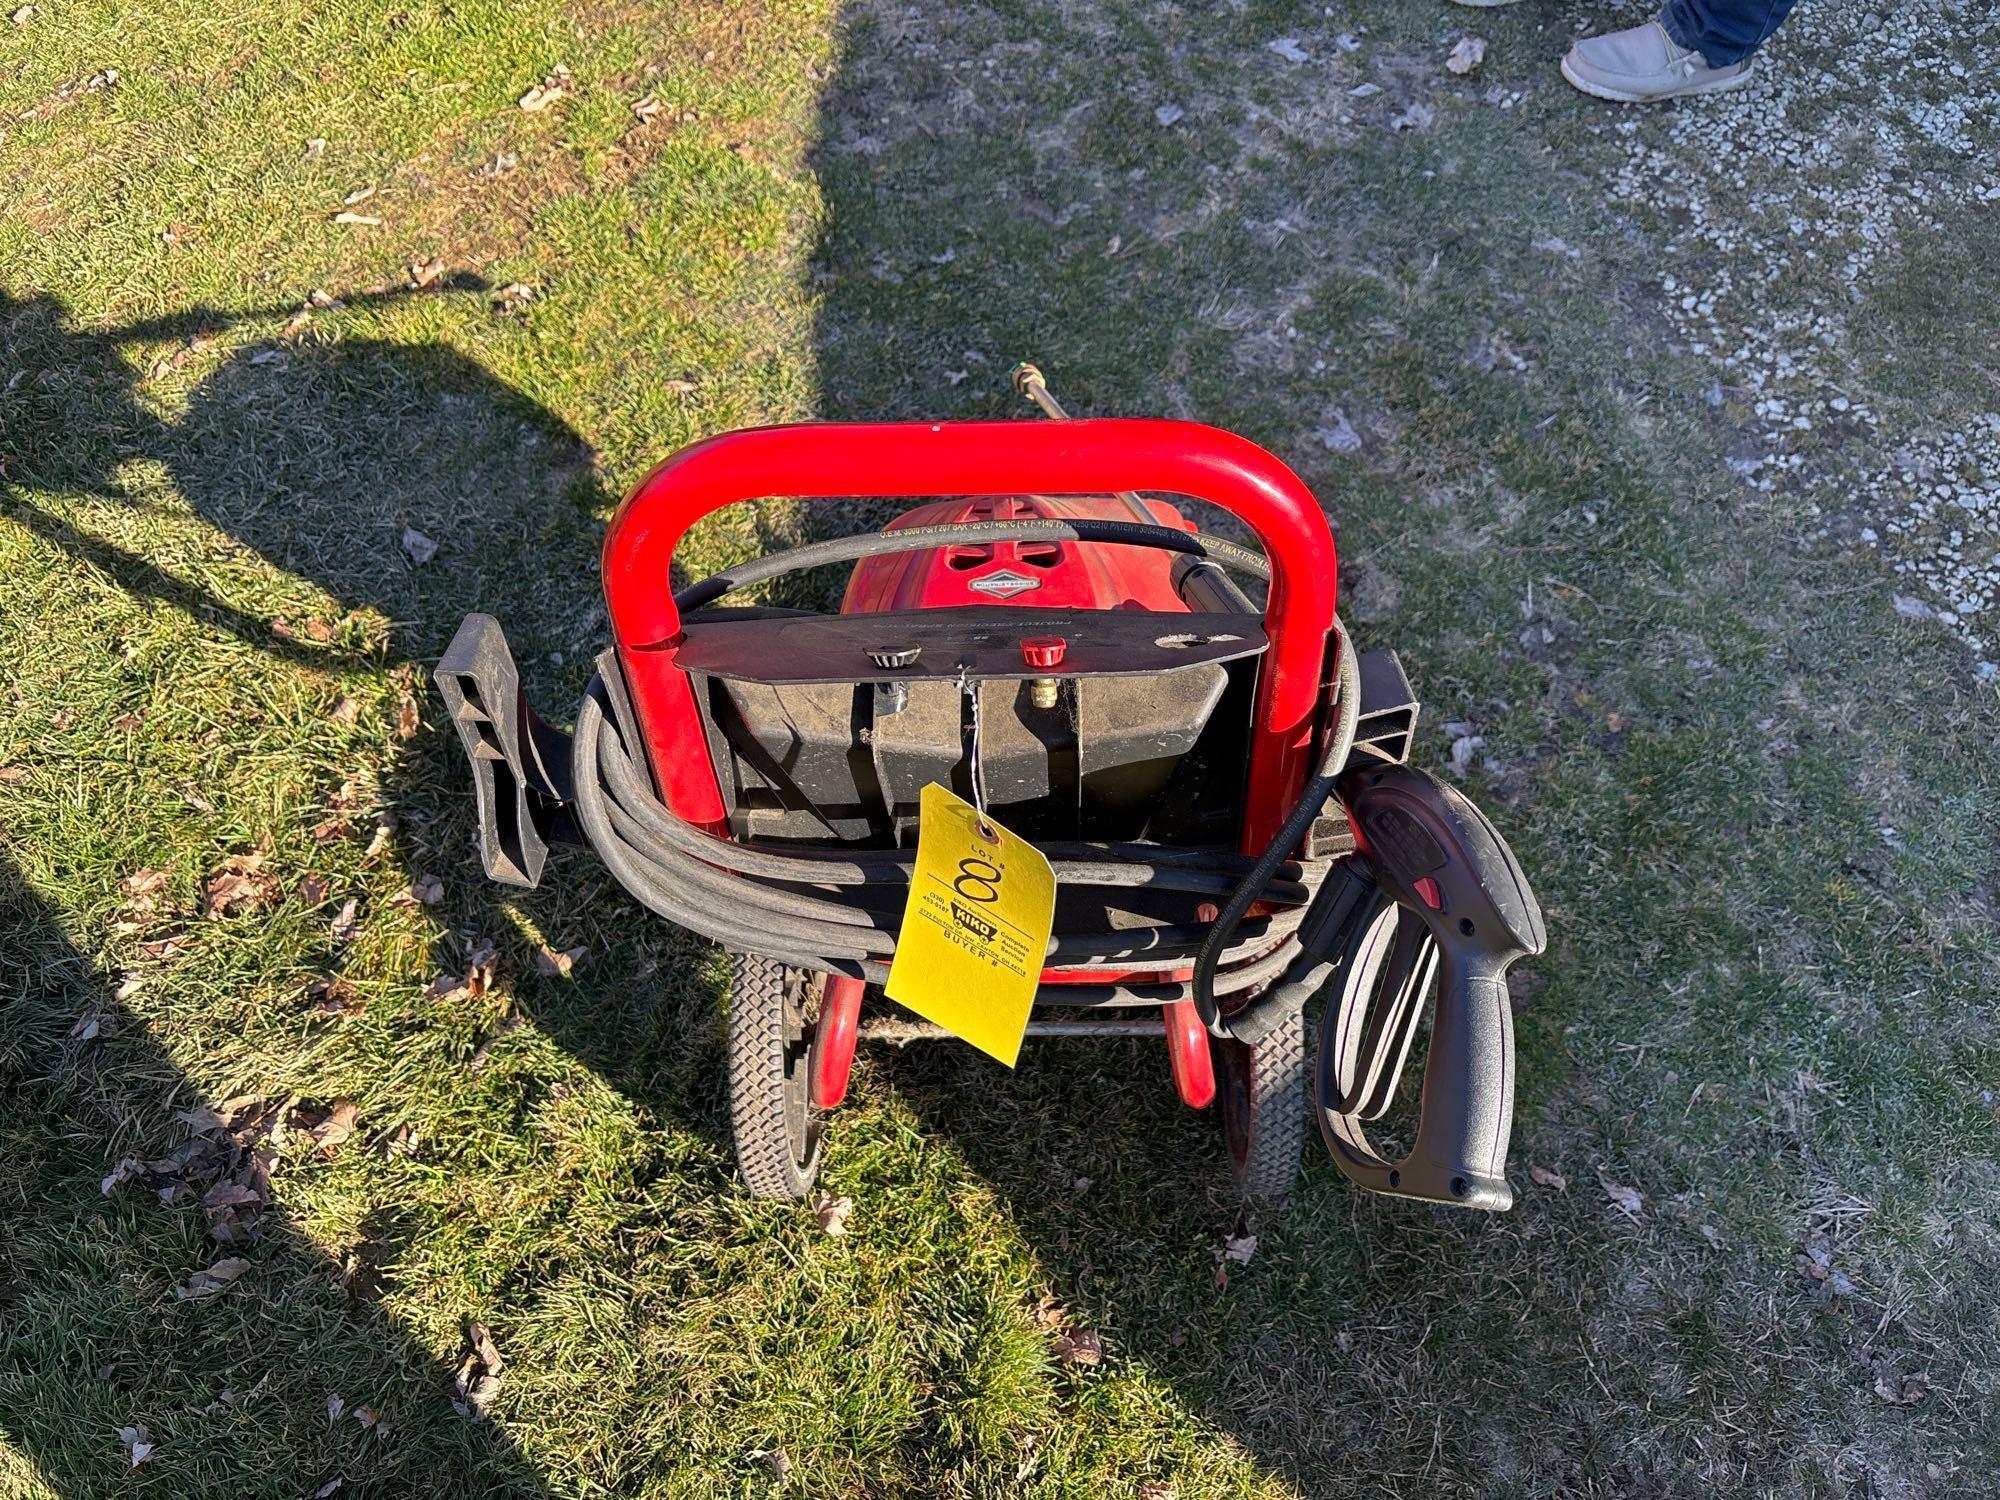 Briggs and Stratton 675 Series Power Washer